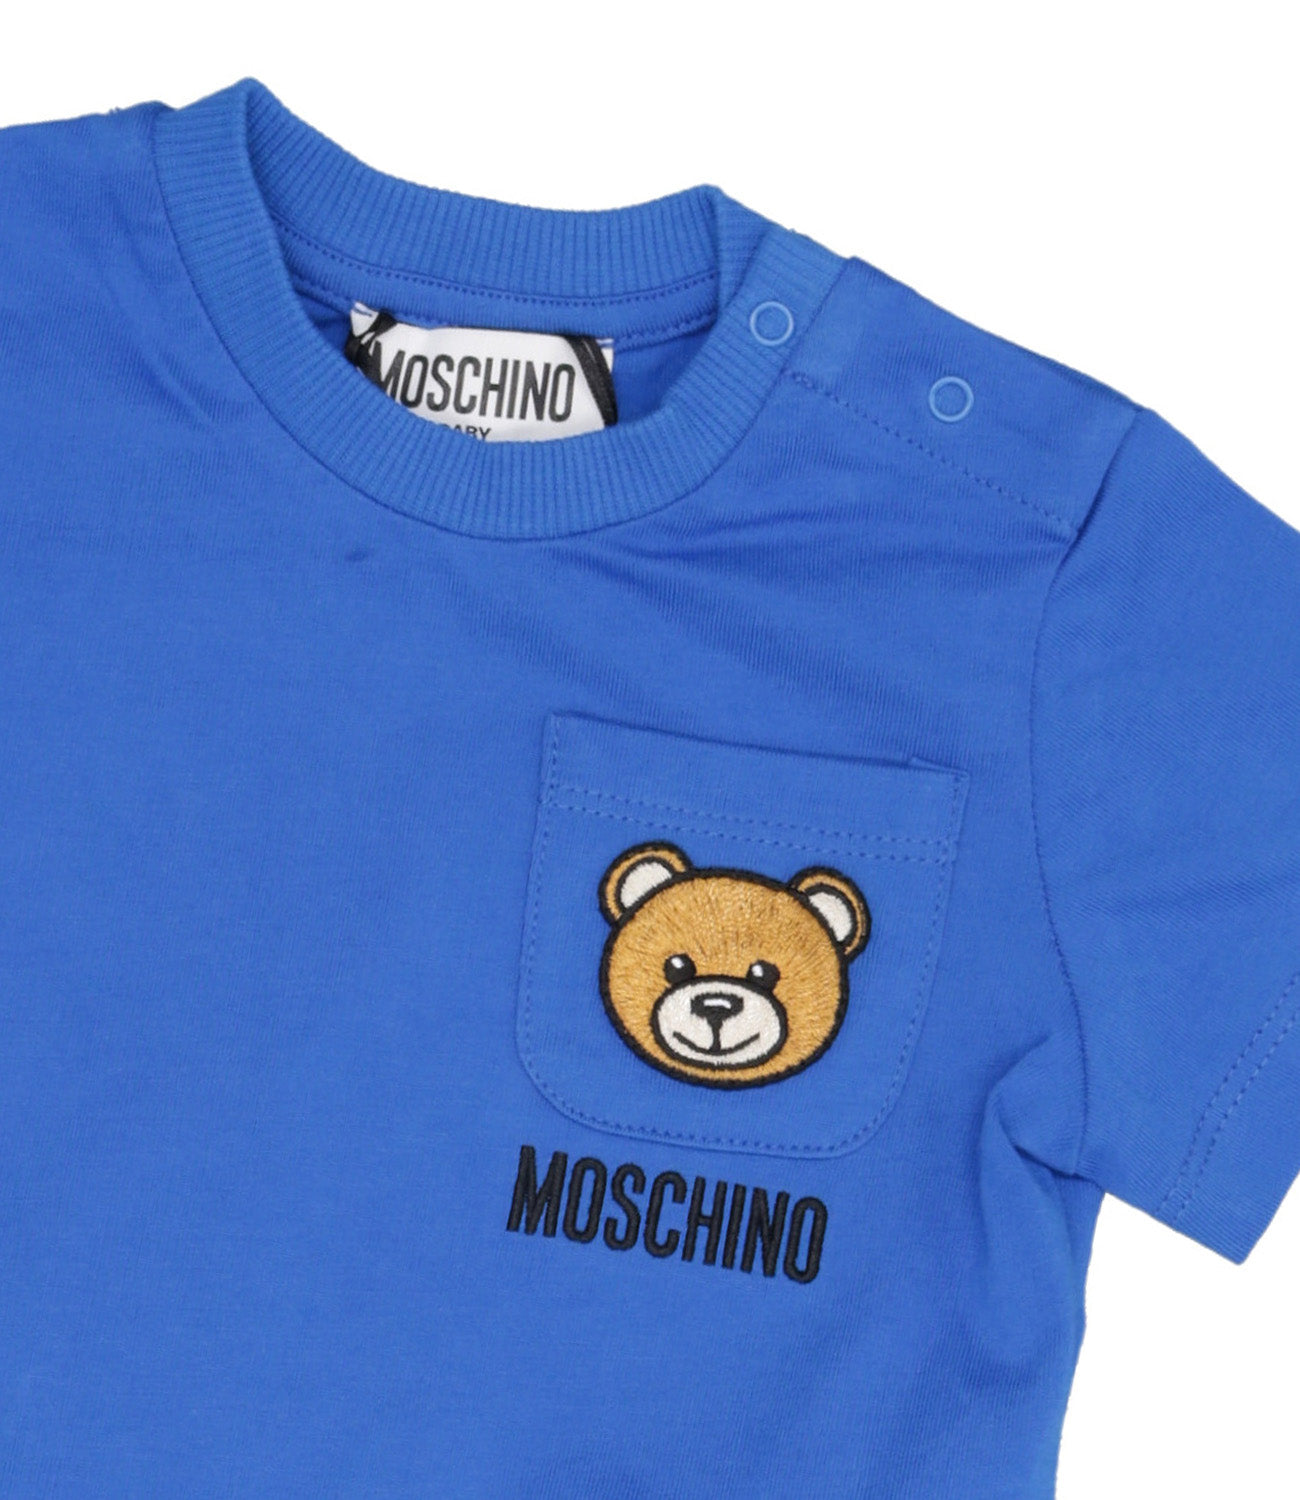 Moschino Baby | Royal Blue and White T-Shirt and Shorts Set